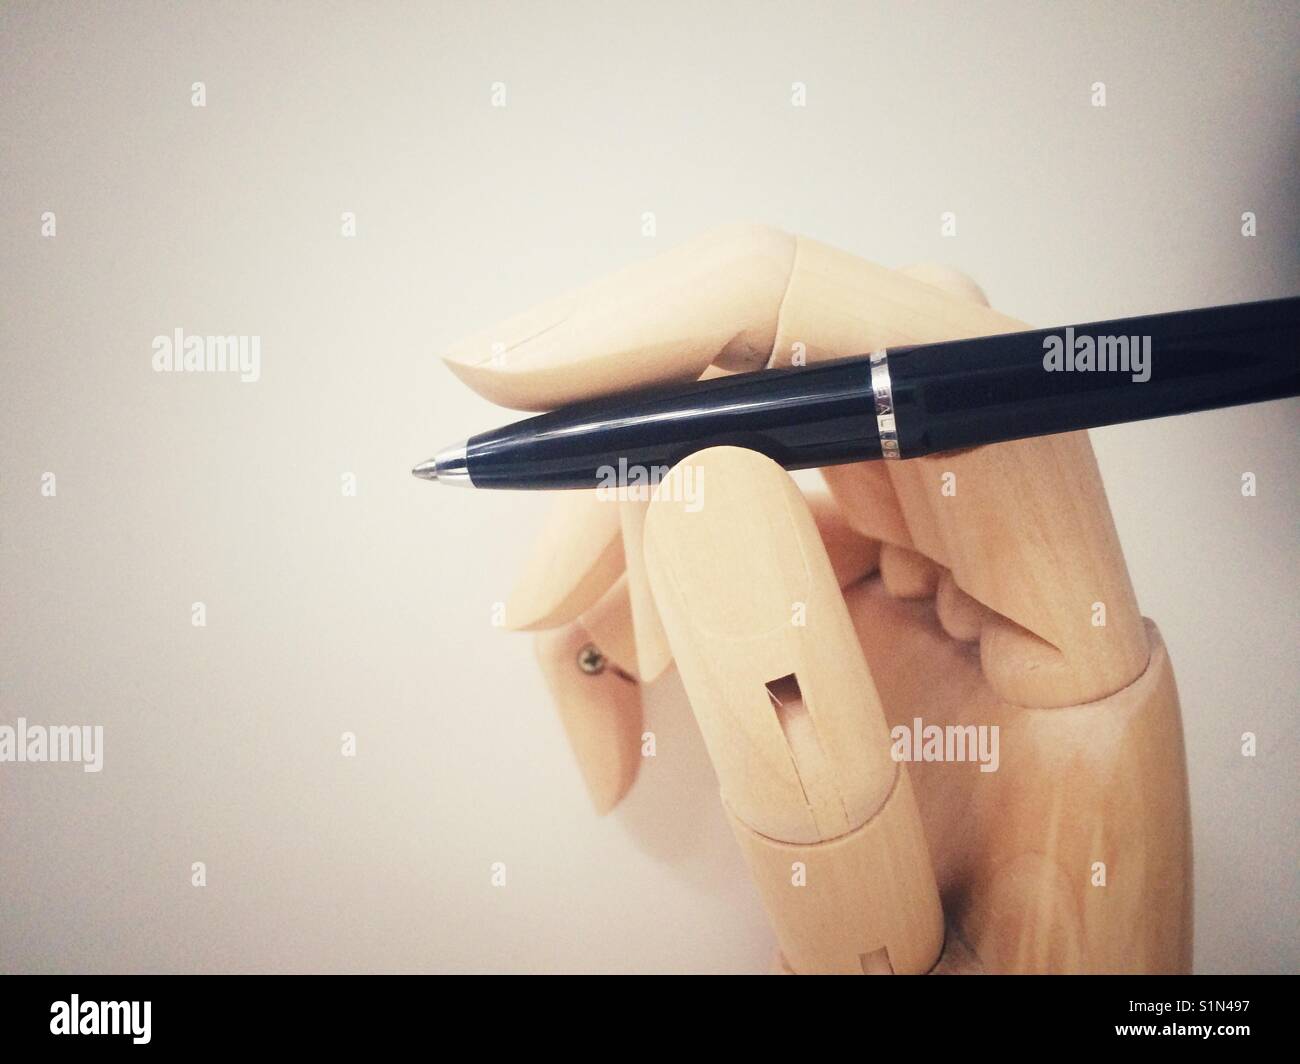 Wood mannequin hand holding a black pen Stock Photo